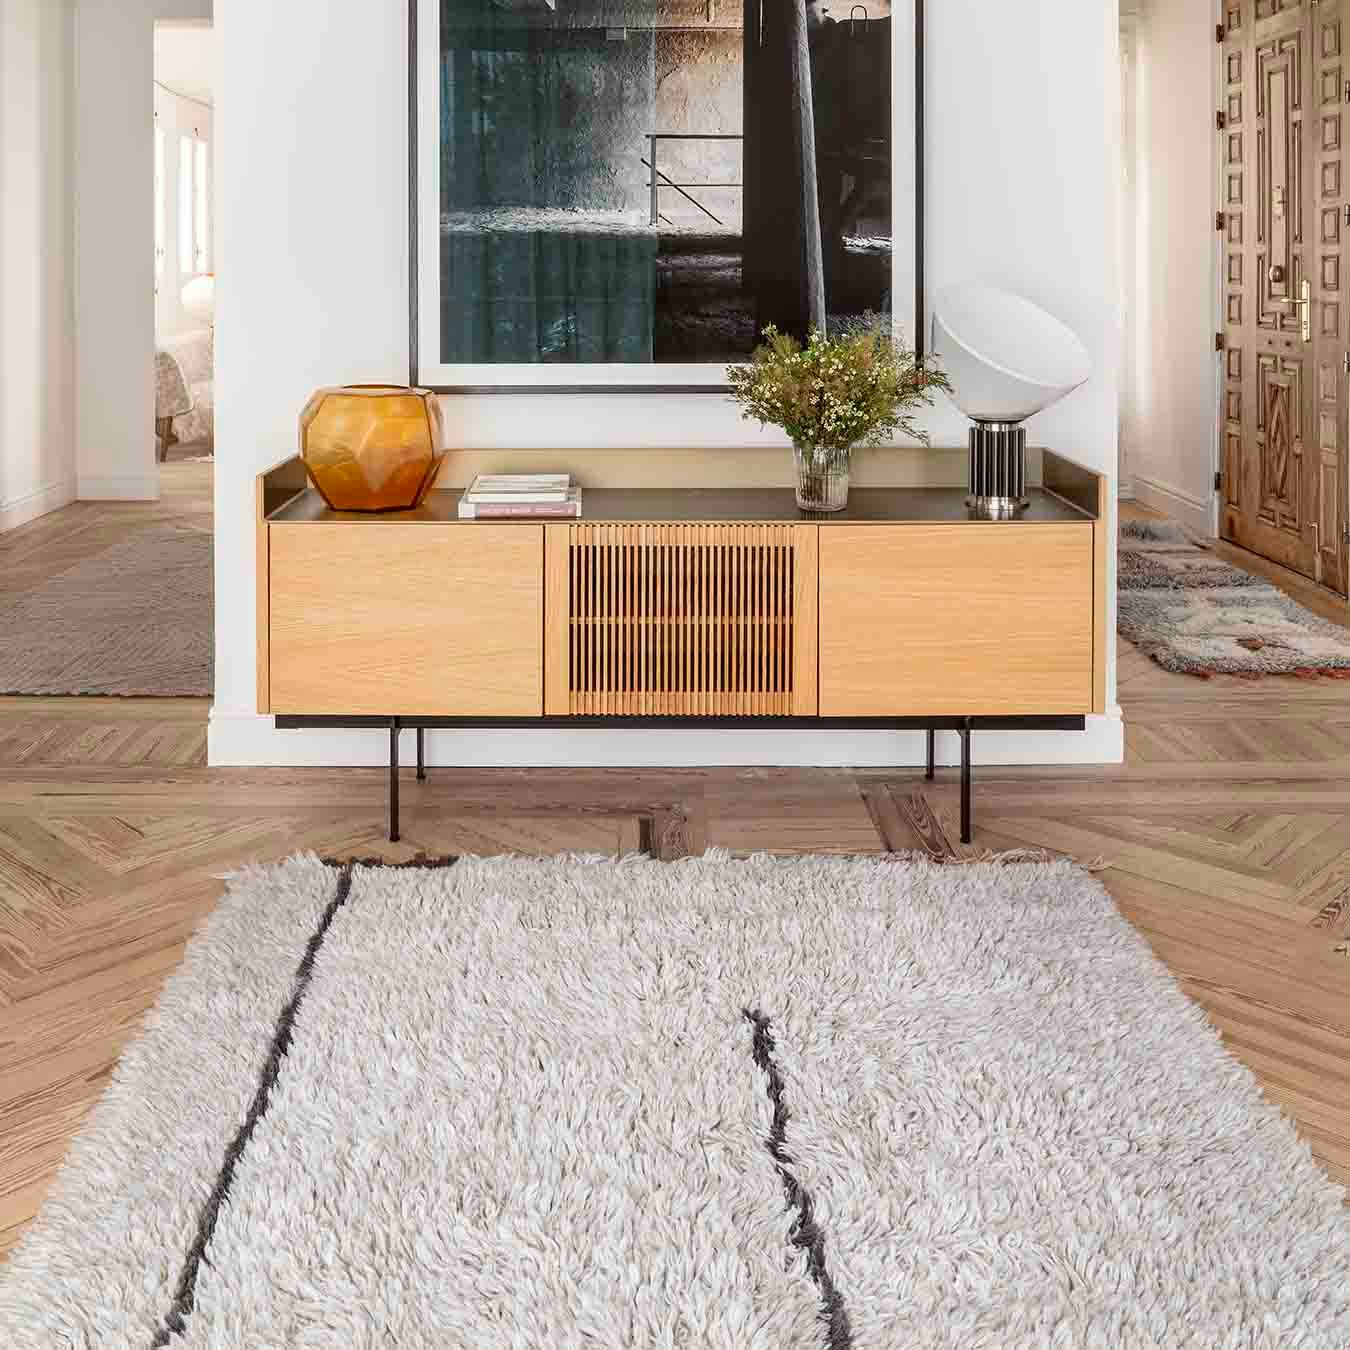 Sandstone Lorena Canals Woolable Rug Autumn Breeze 5' 7 x 7' 11 Natural Almond Frost Base: Recycled Cotton Pile: 100% Wool 